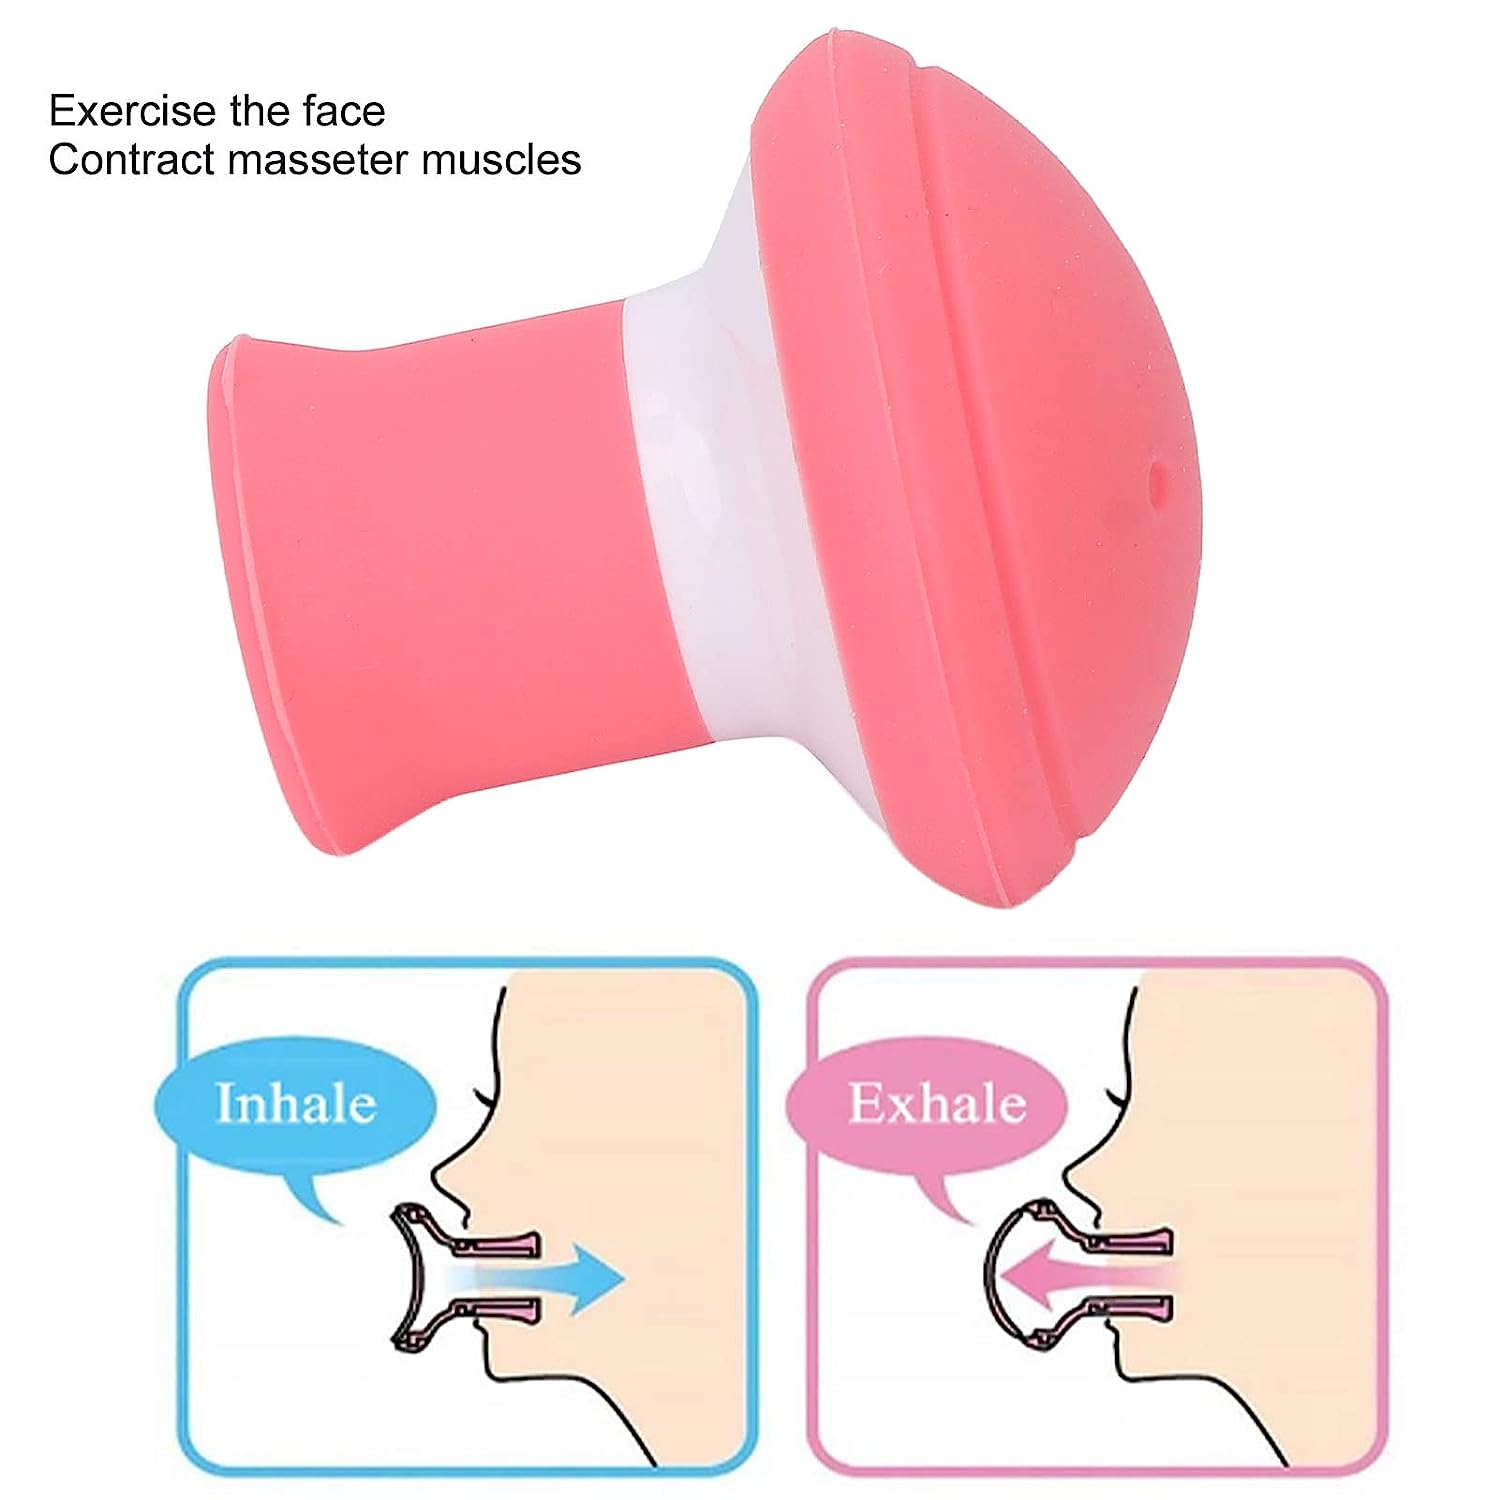 6104a SILICONE FACIAL JAW EXERCISER BREATHING TYPE FACE SLIMMER, BREATHING TYPE FACE SLIMMER FACE LIFT INHALING & EXHALING TOOL, LOOK YOUNGER AND HEALTHIER - HELPS REDUCE STRESS AND CRAVINGS (Card Packing)